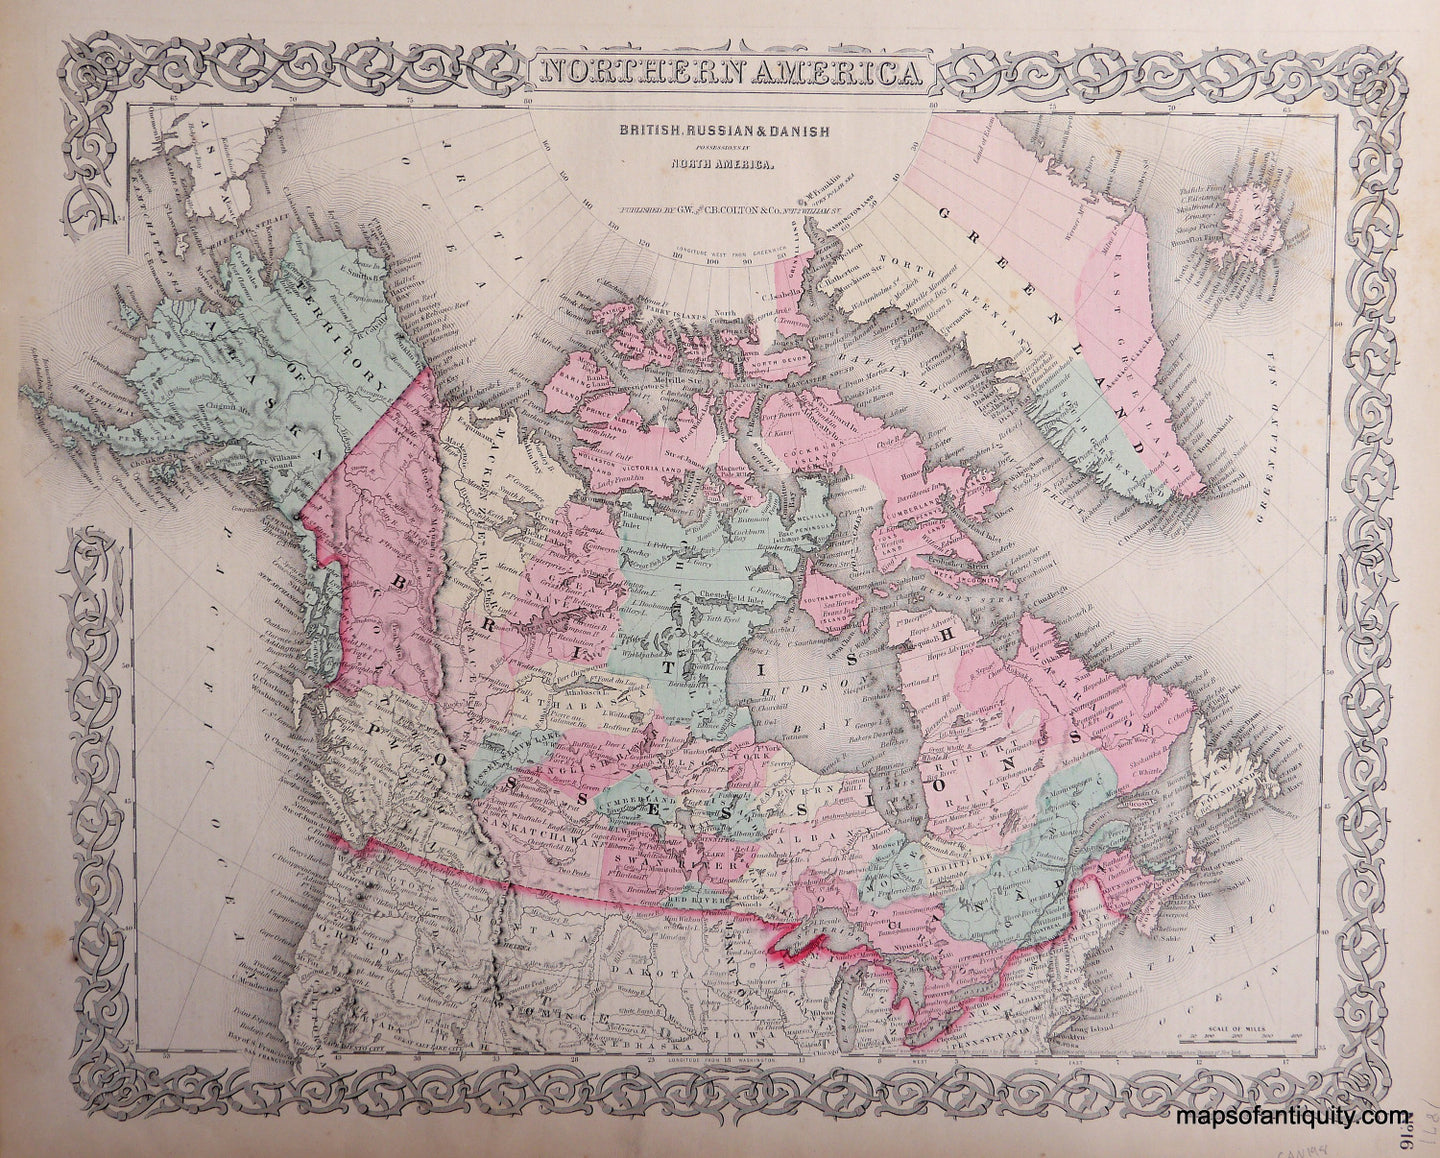 Antique-Hand-Colored-Map-Northern-America-British-Russian-and-Danish-Possessions-in-North-America-Canada--1871-Colton-Maps-Of-Antiquity